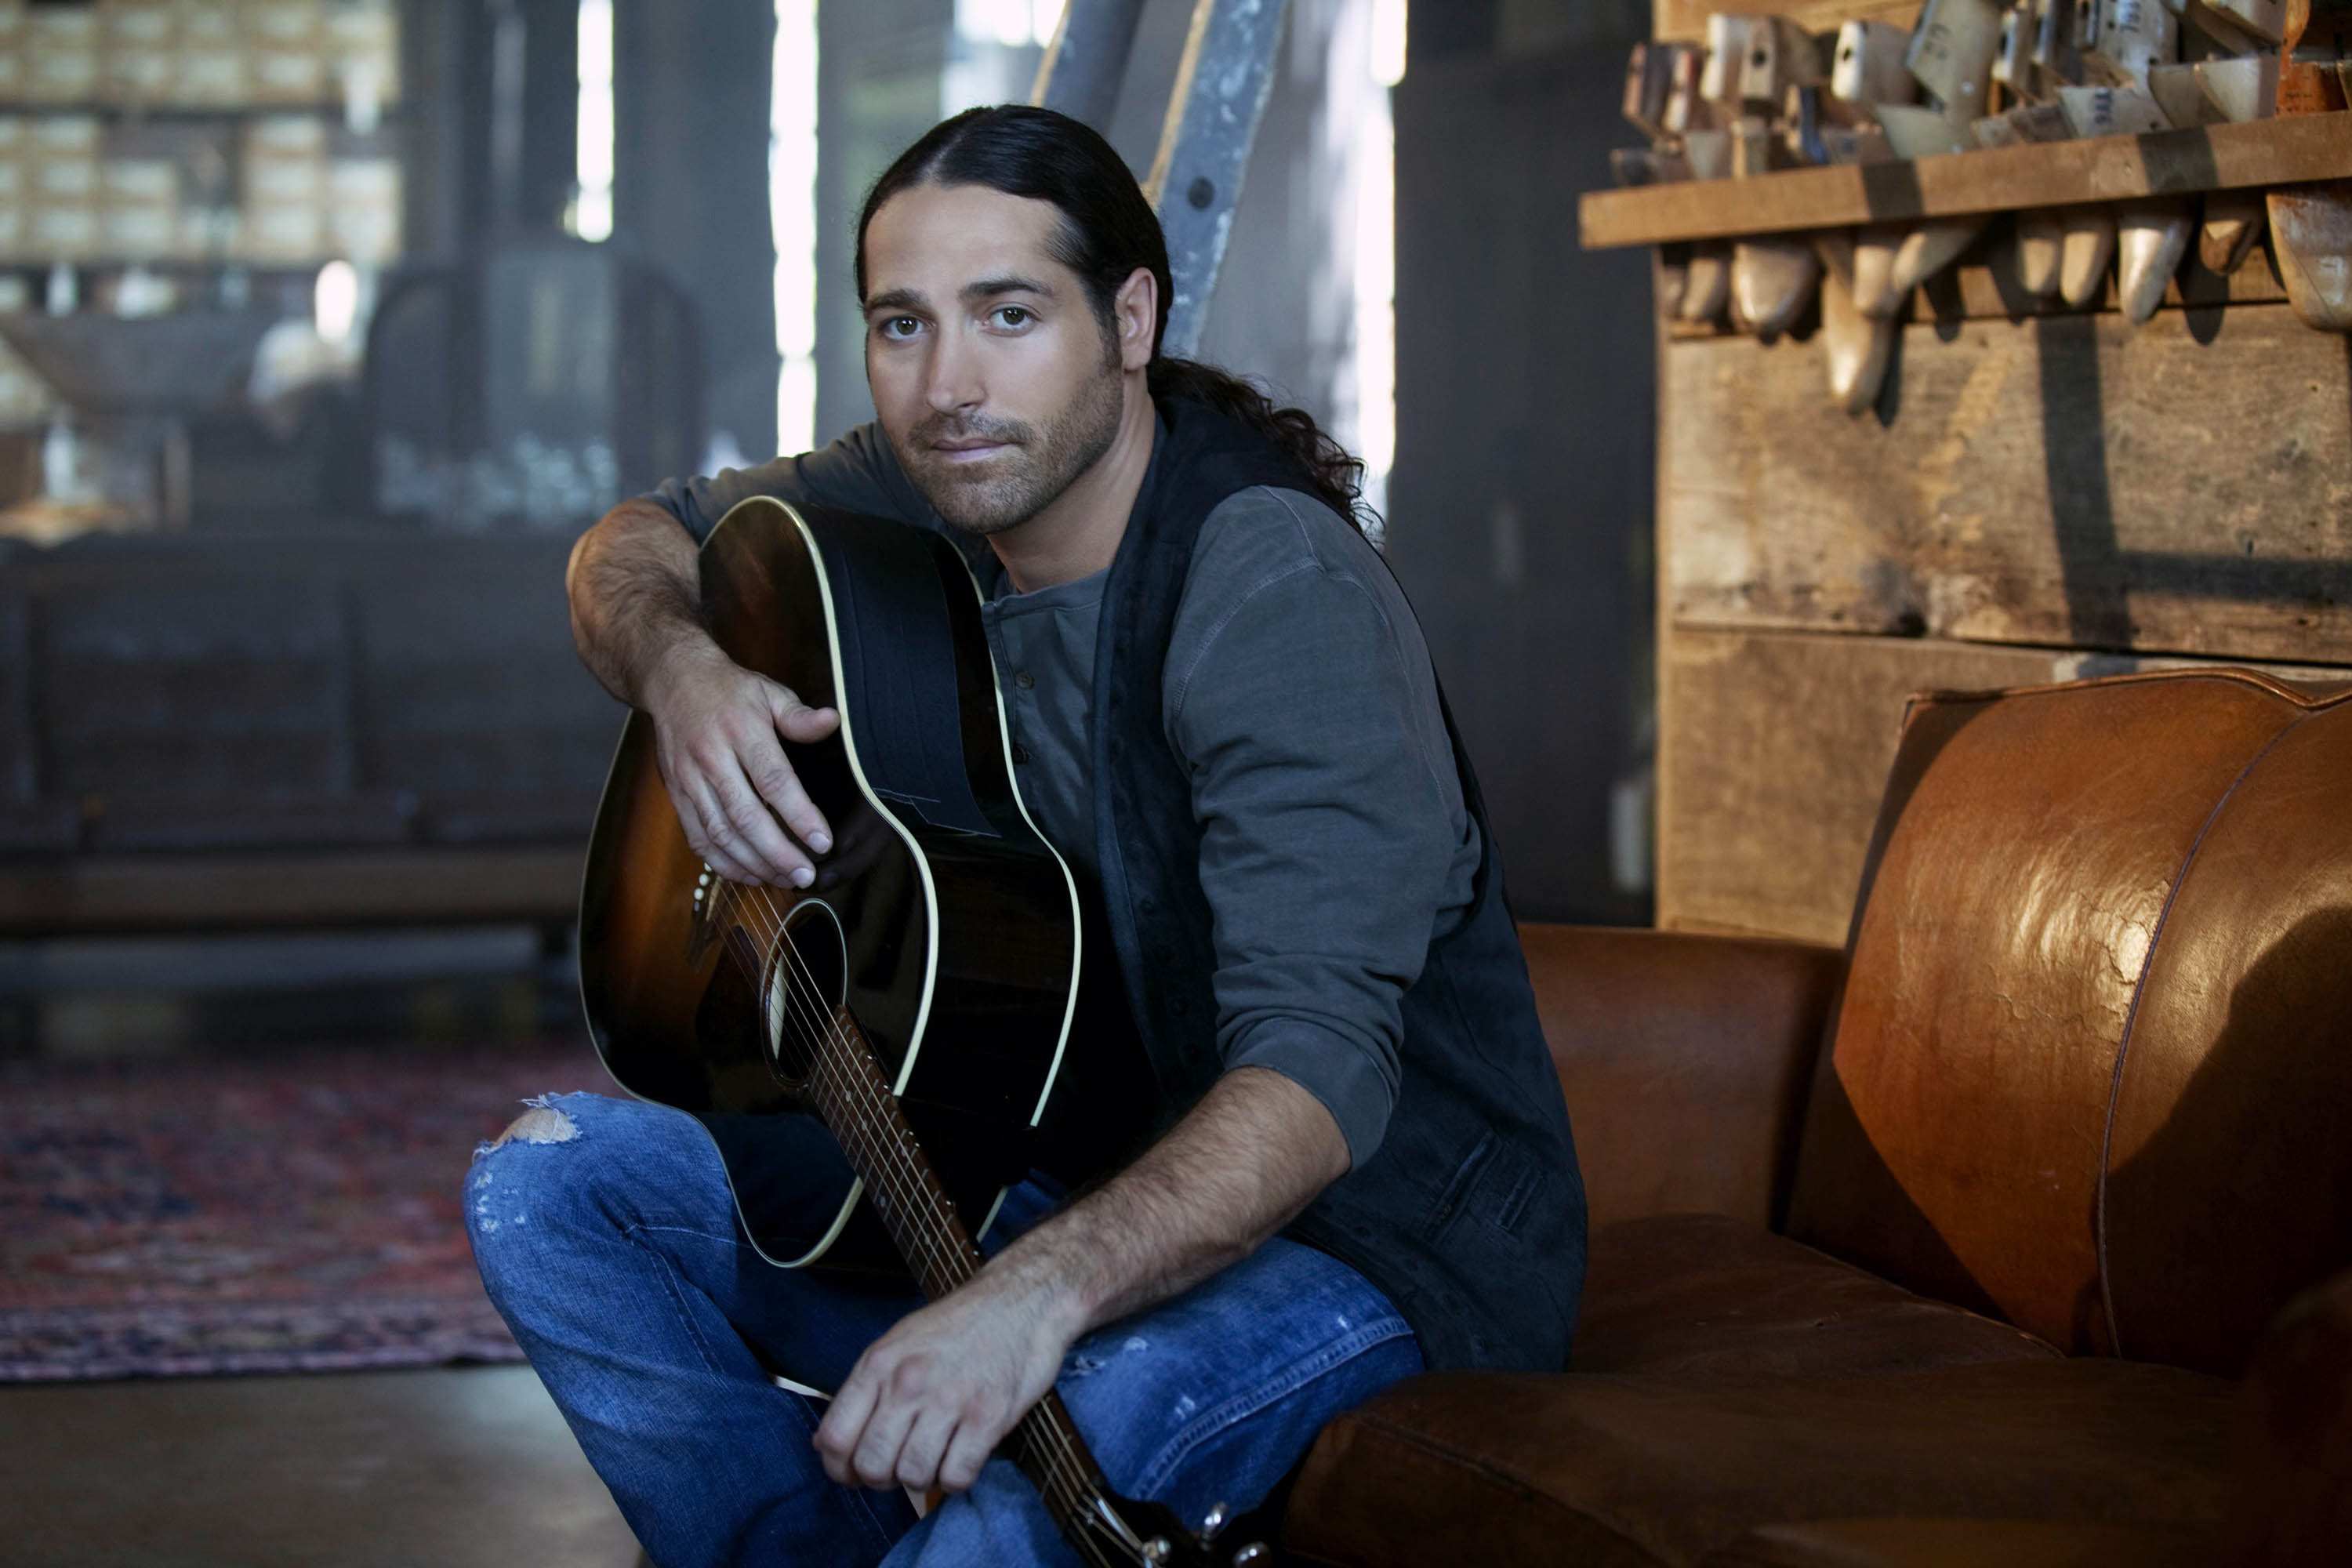 A Wisconsin native, Josh Thompson is now pursuing his passion as a country music artist in Nashville.